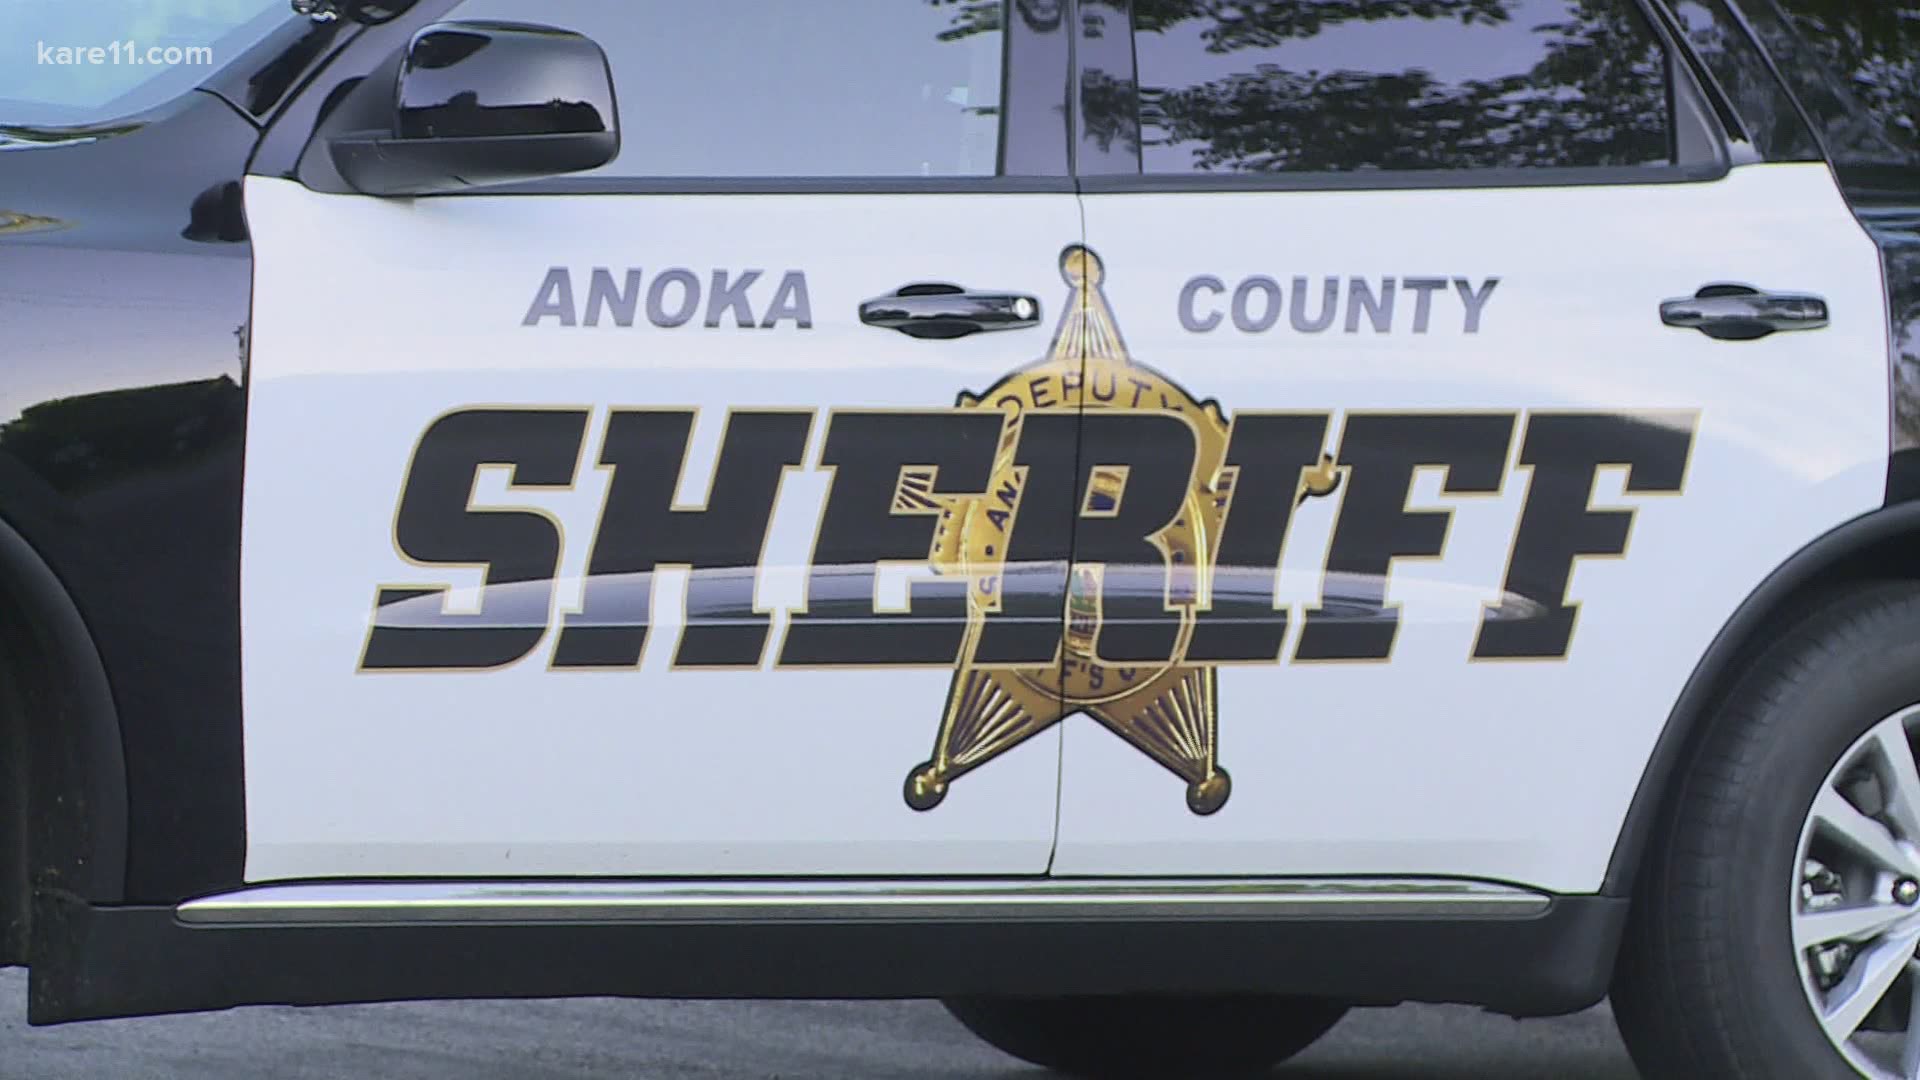 The Anoka County Sheriff's Office says deputies used a smoke canister and tear gas after some people in a group of about 200 refused to leave.